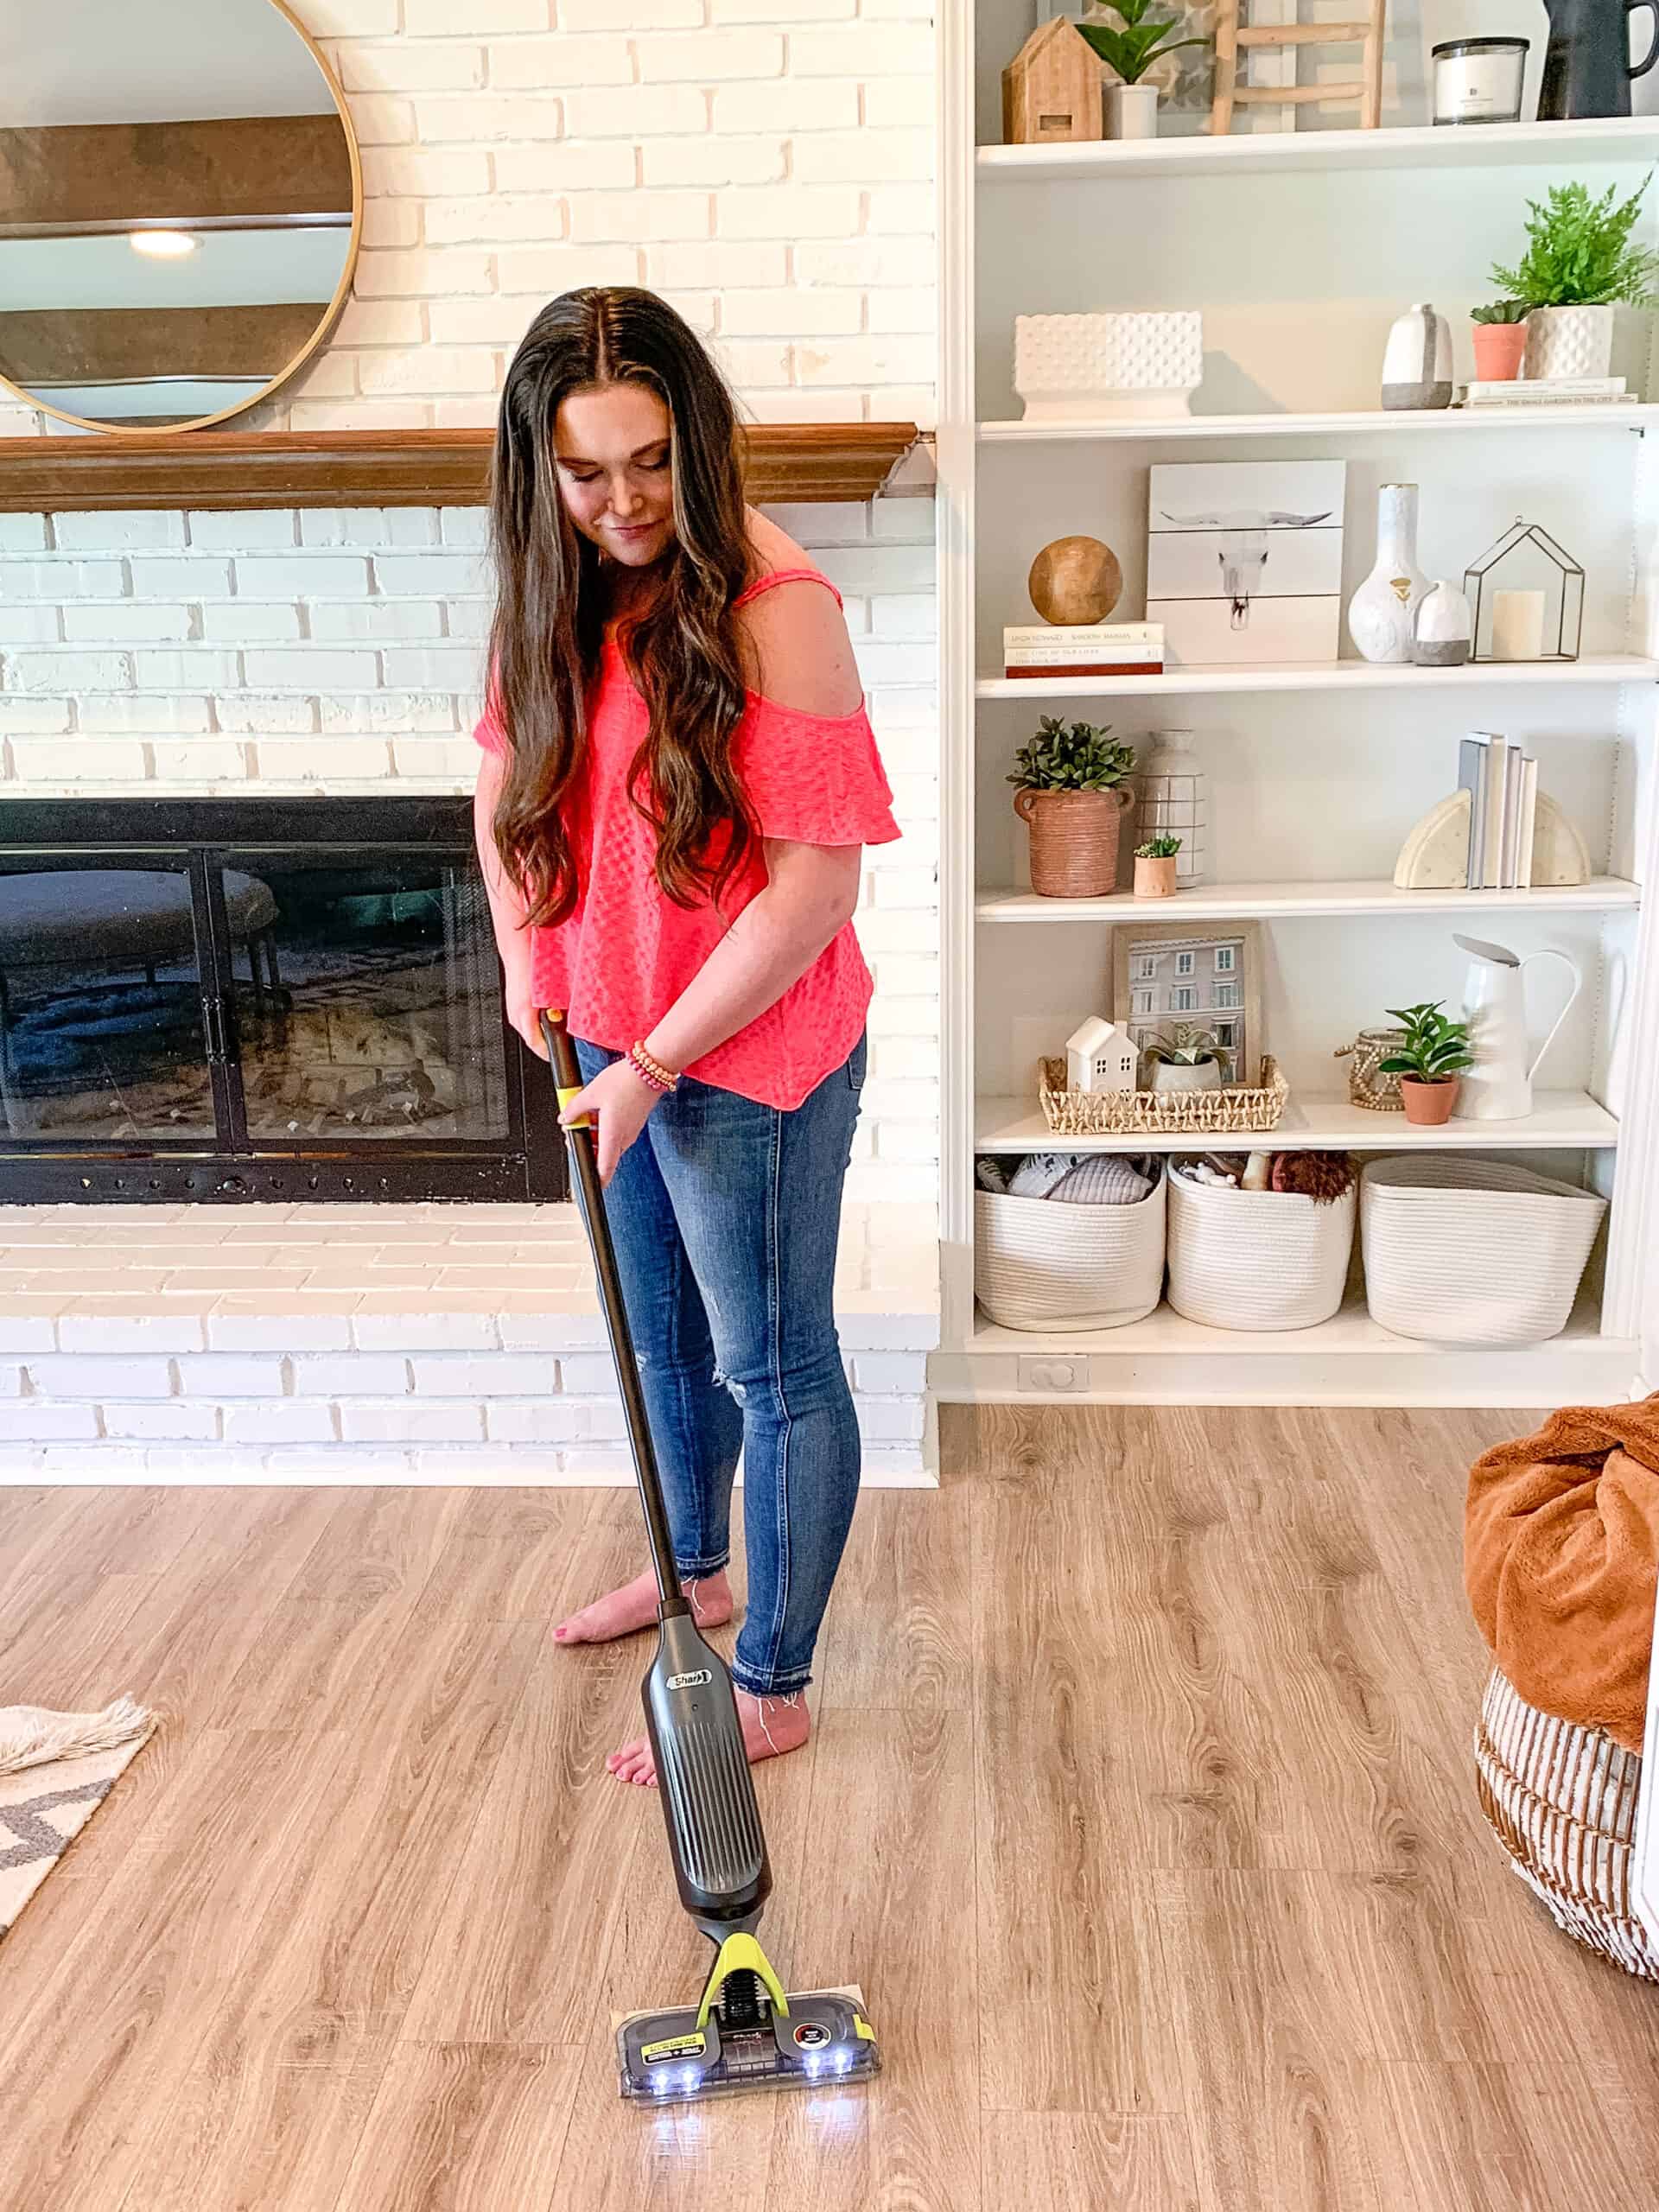 Speed Clean With Me with the Shark VACMOP Floor Cleaner - Heyitsrubee